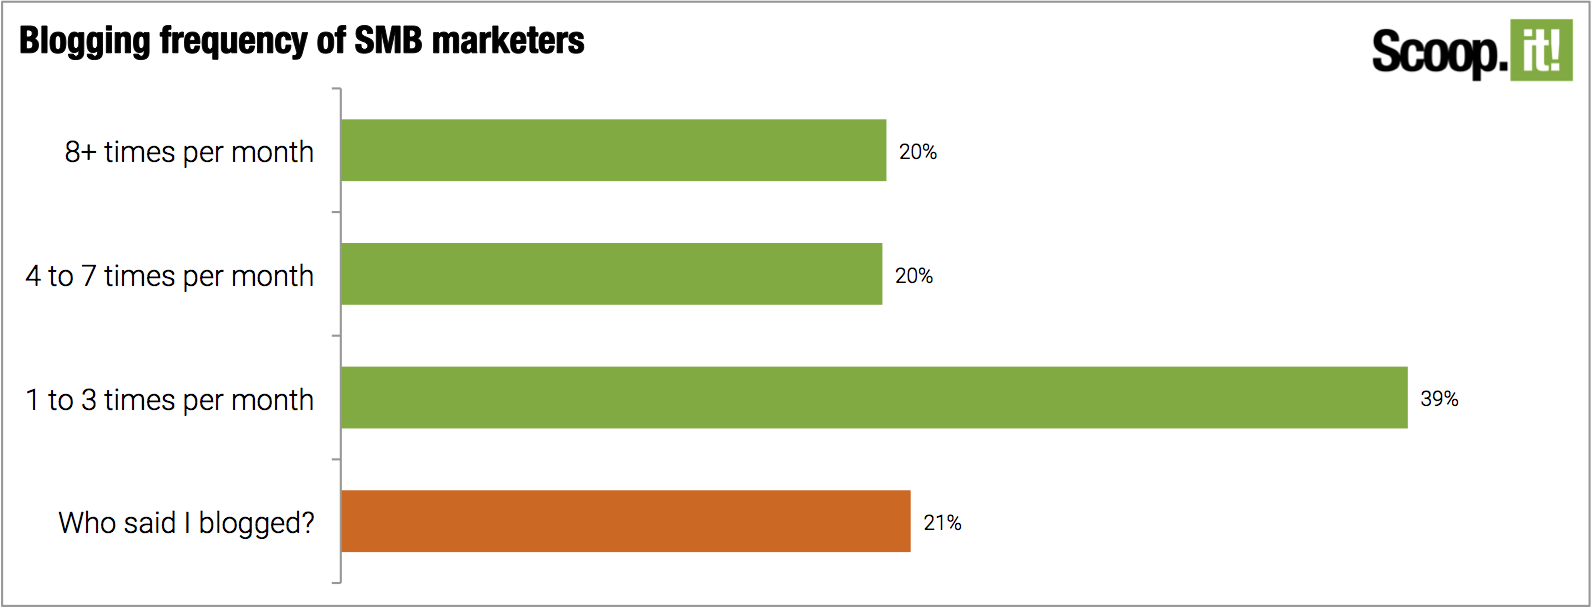 Blogging frequency of SMB marketers